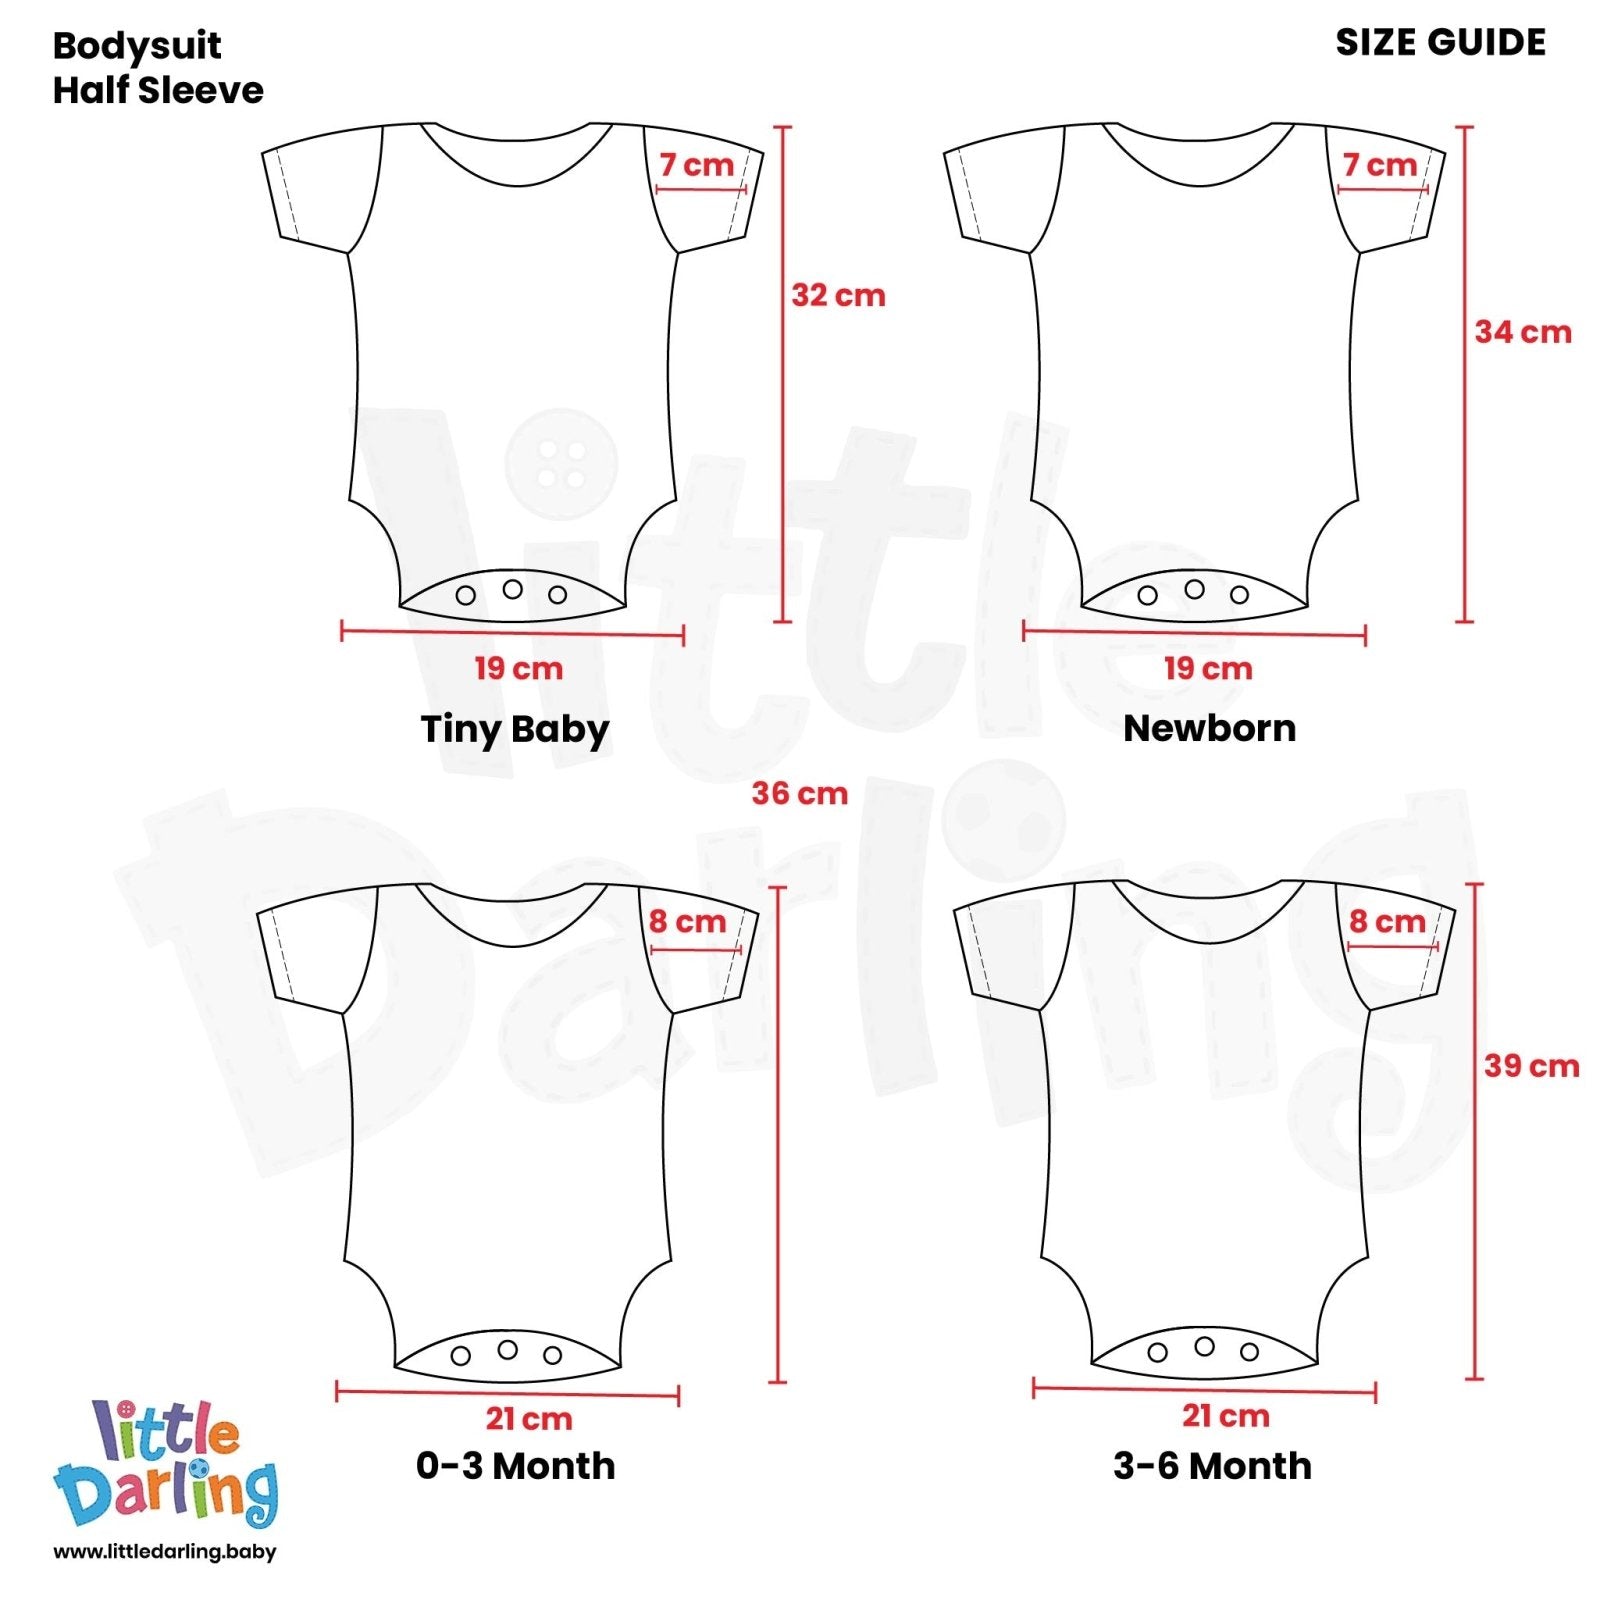 Baby Bodysuits Short Sleeves  Pk Of 3 I Love Dad by Little Darling